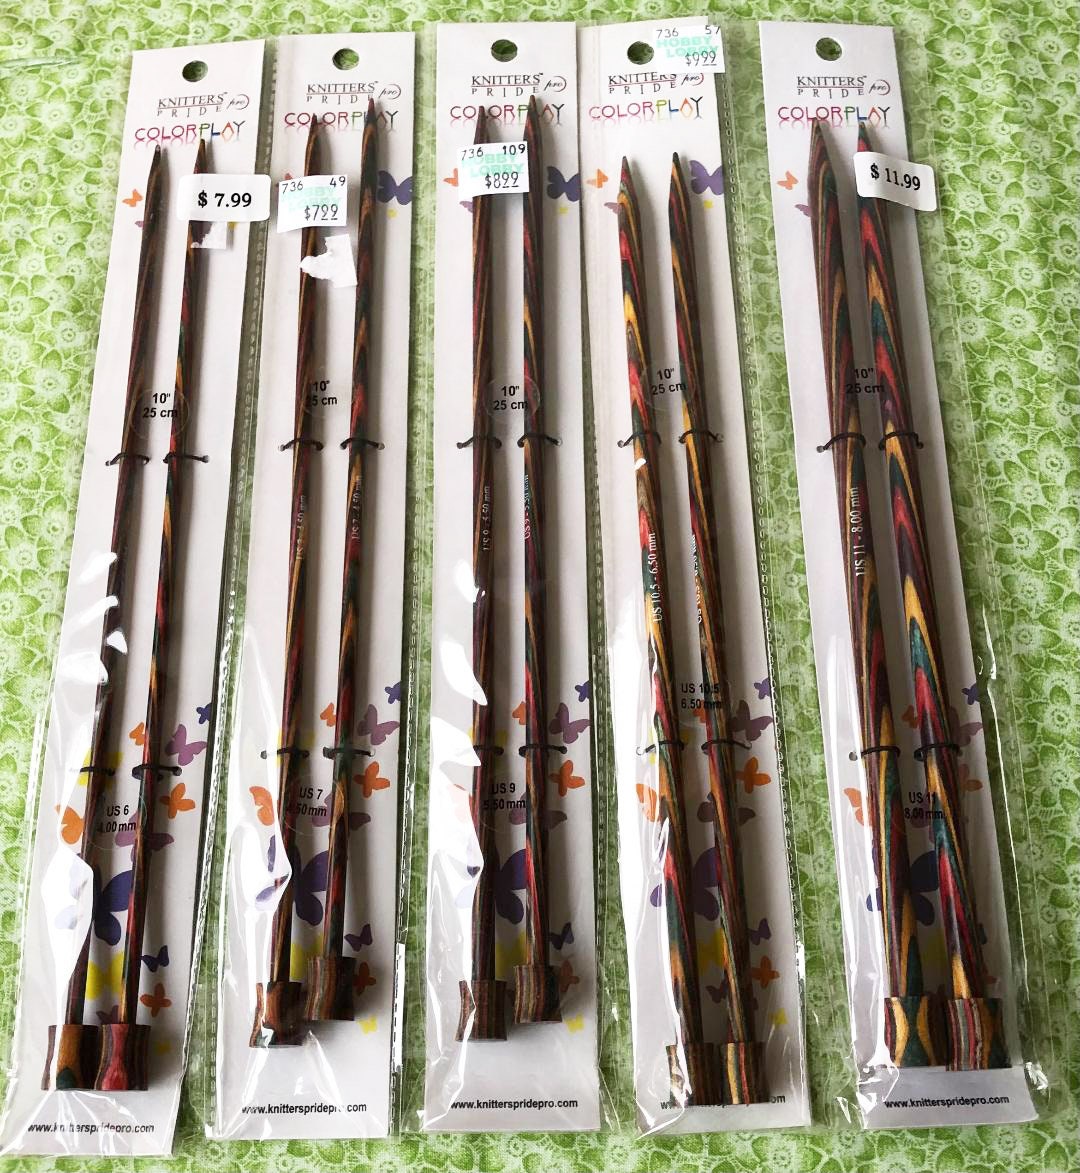 knitter's Pride Colorplay Laminated Birch Wood Knitting Needles In Color  Waves